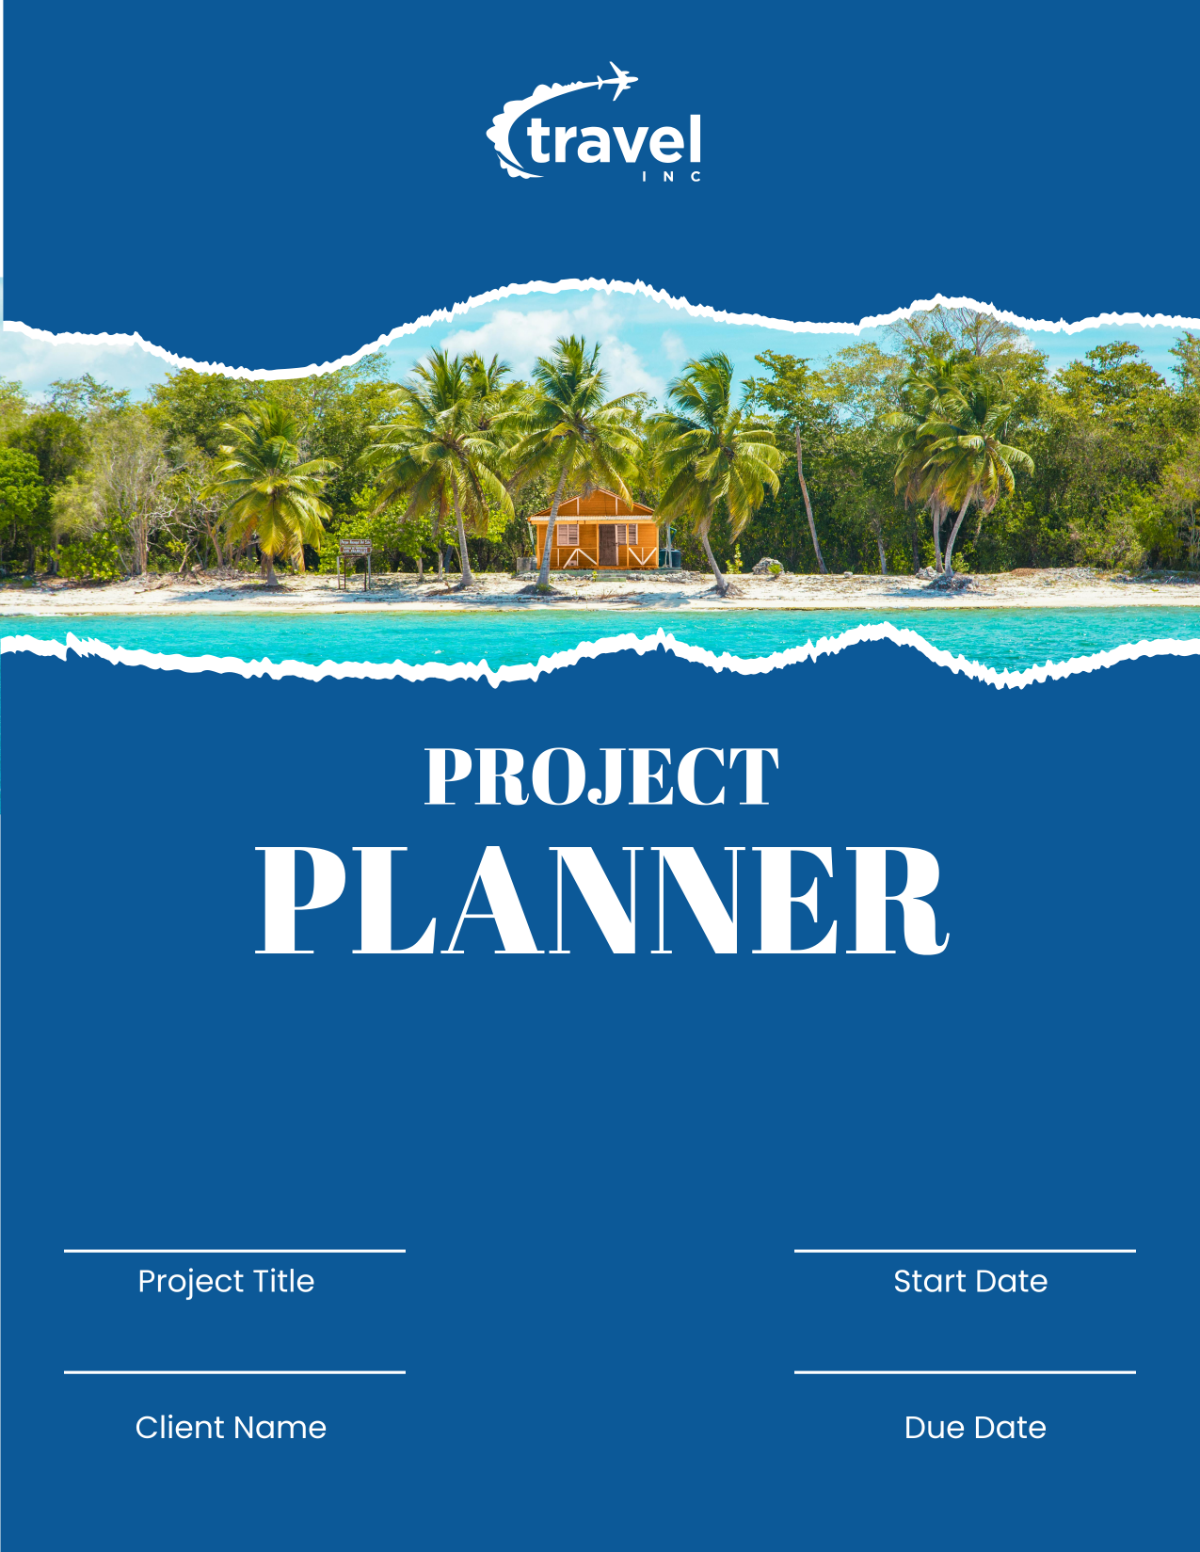 Free Travel Agency Project Planner Template